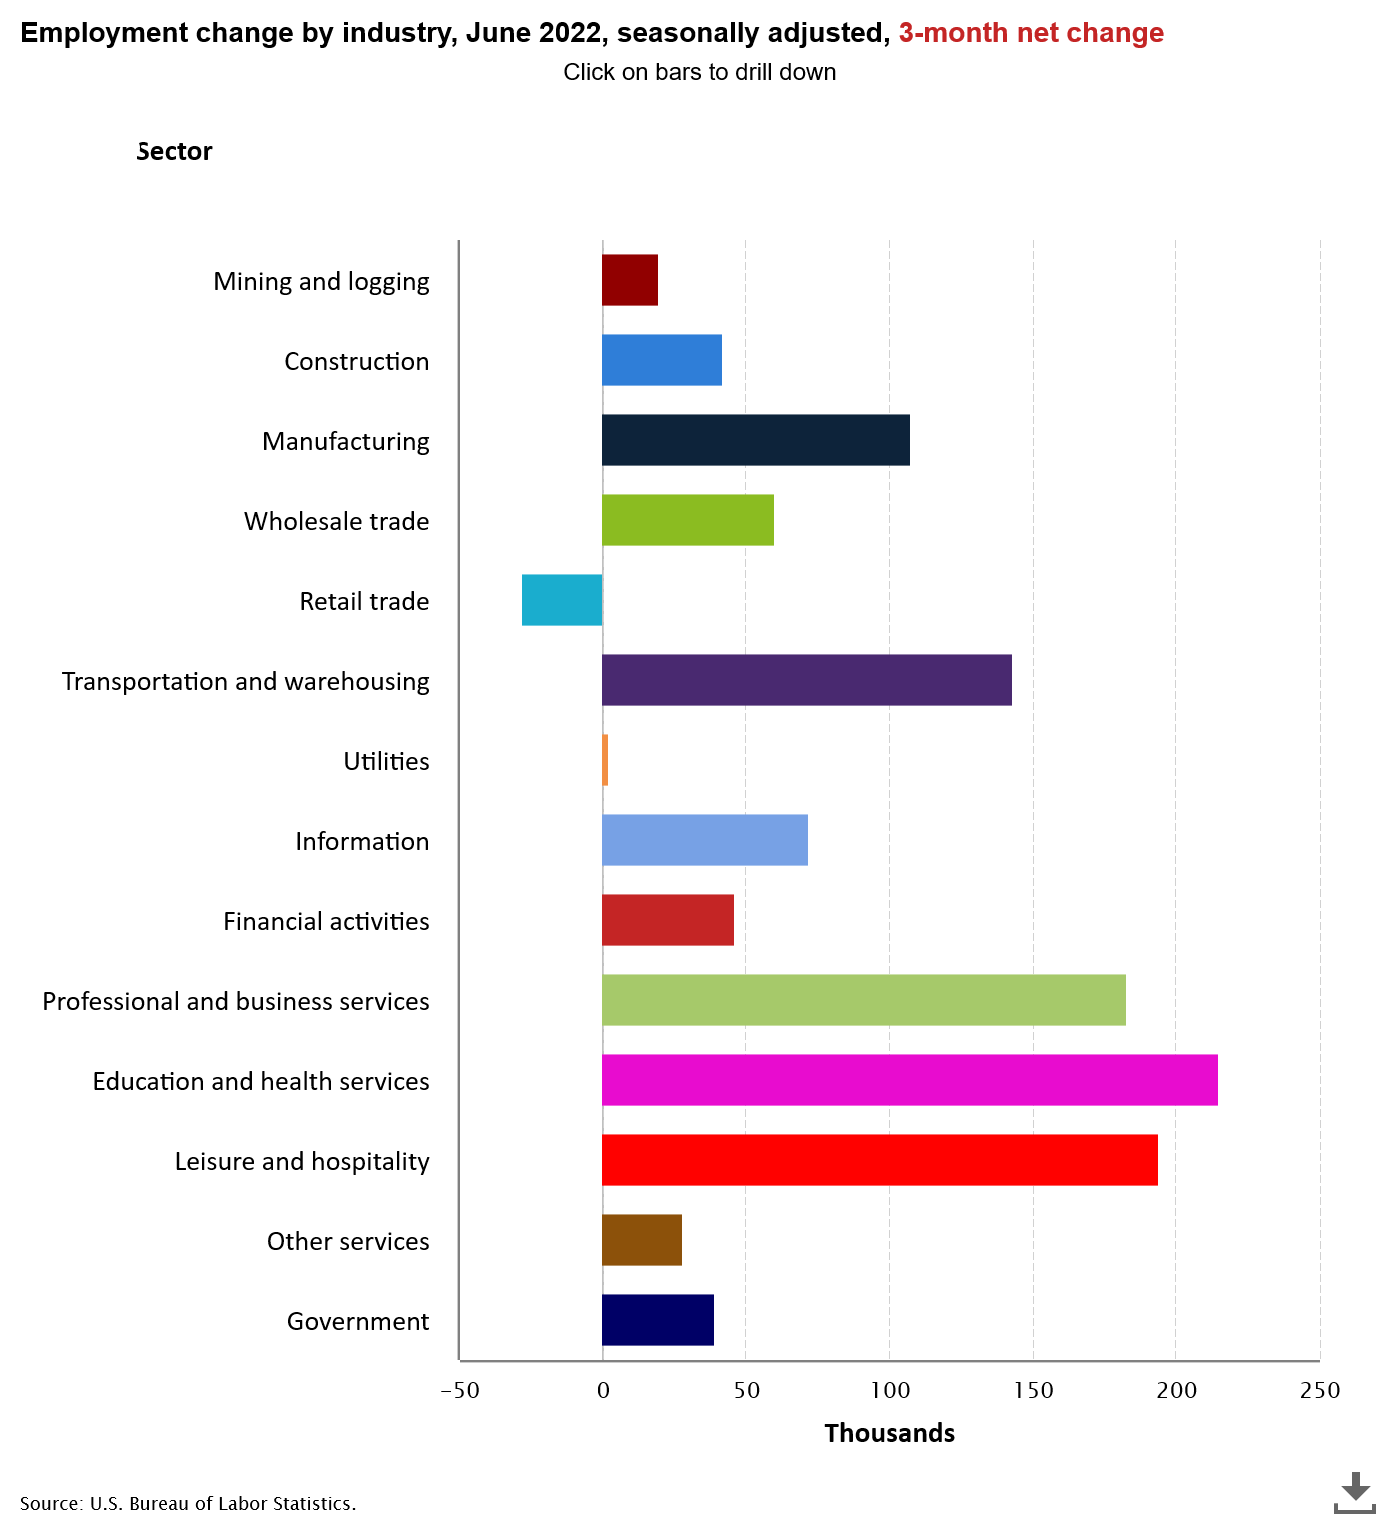 Employment change by industry, Q2 2022